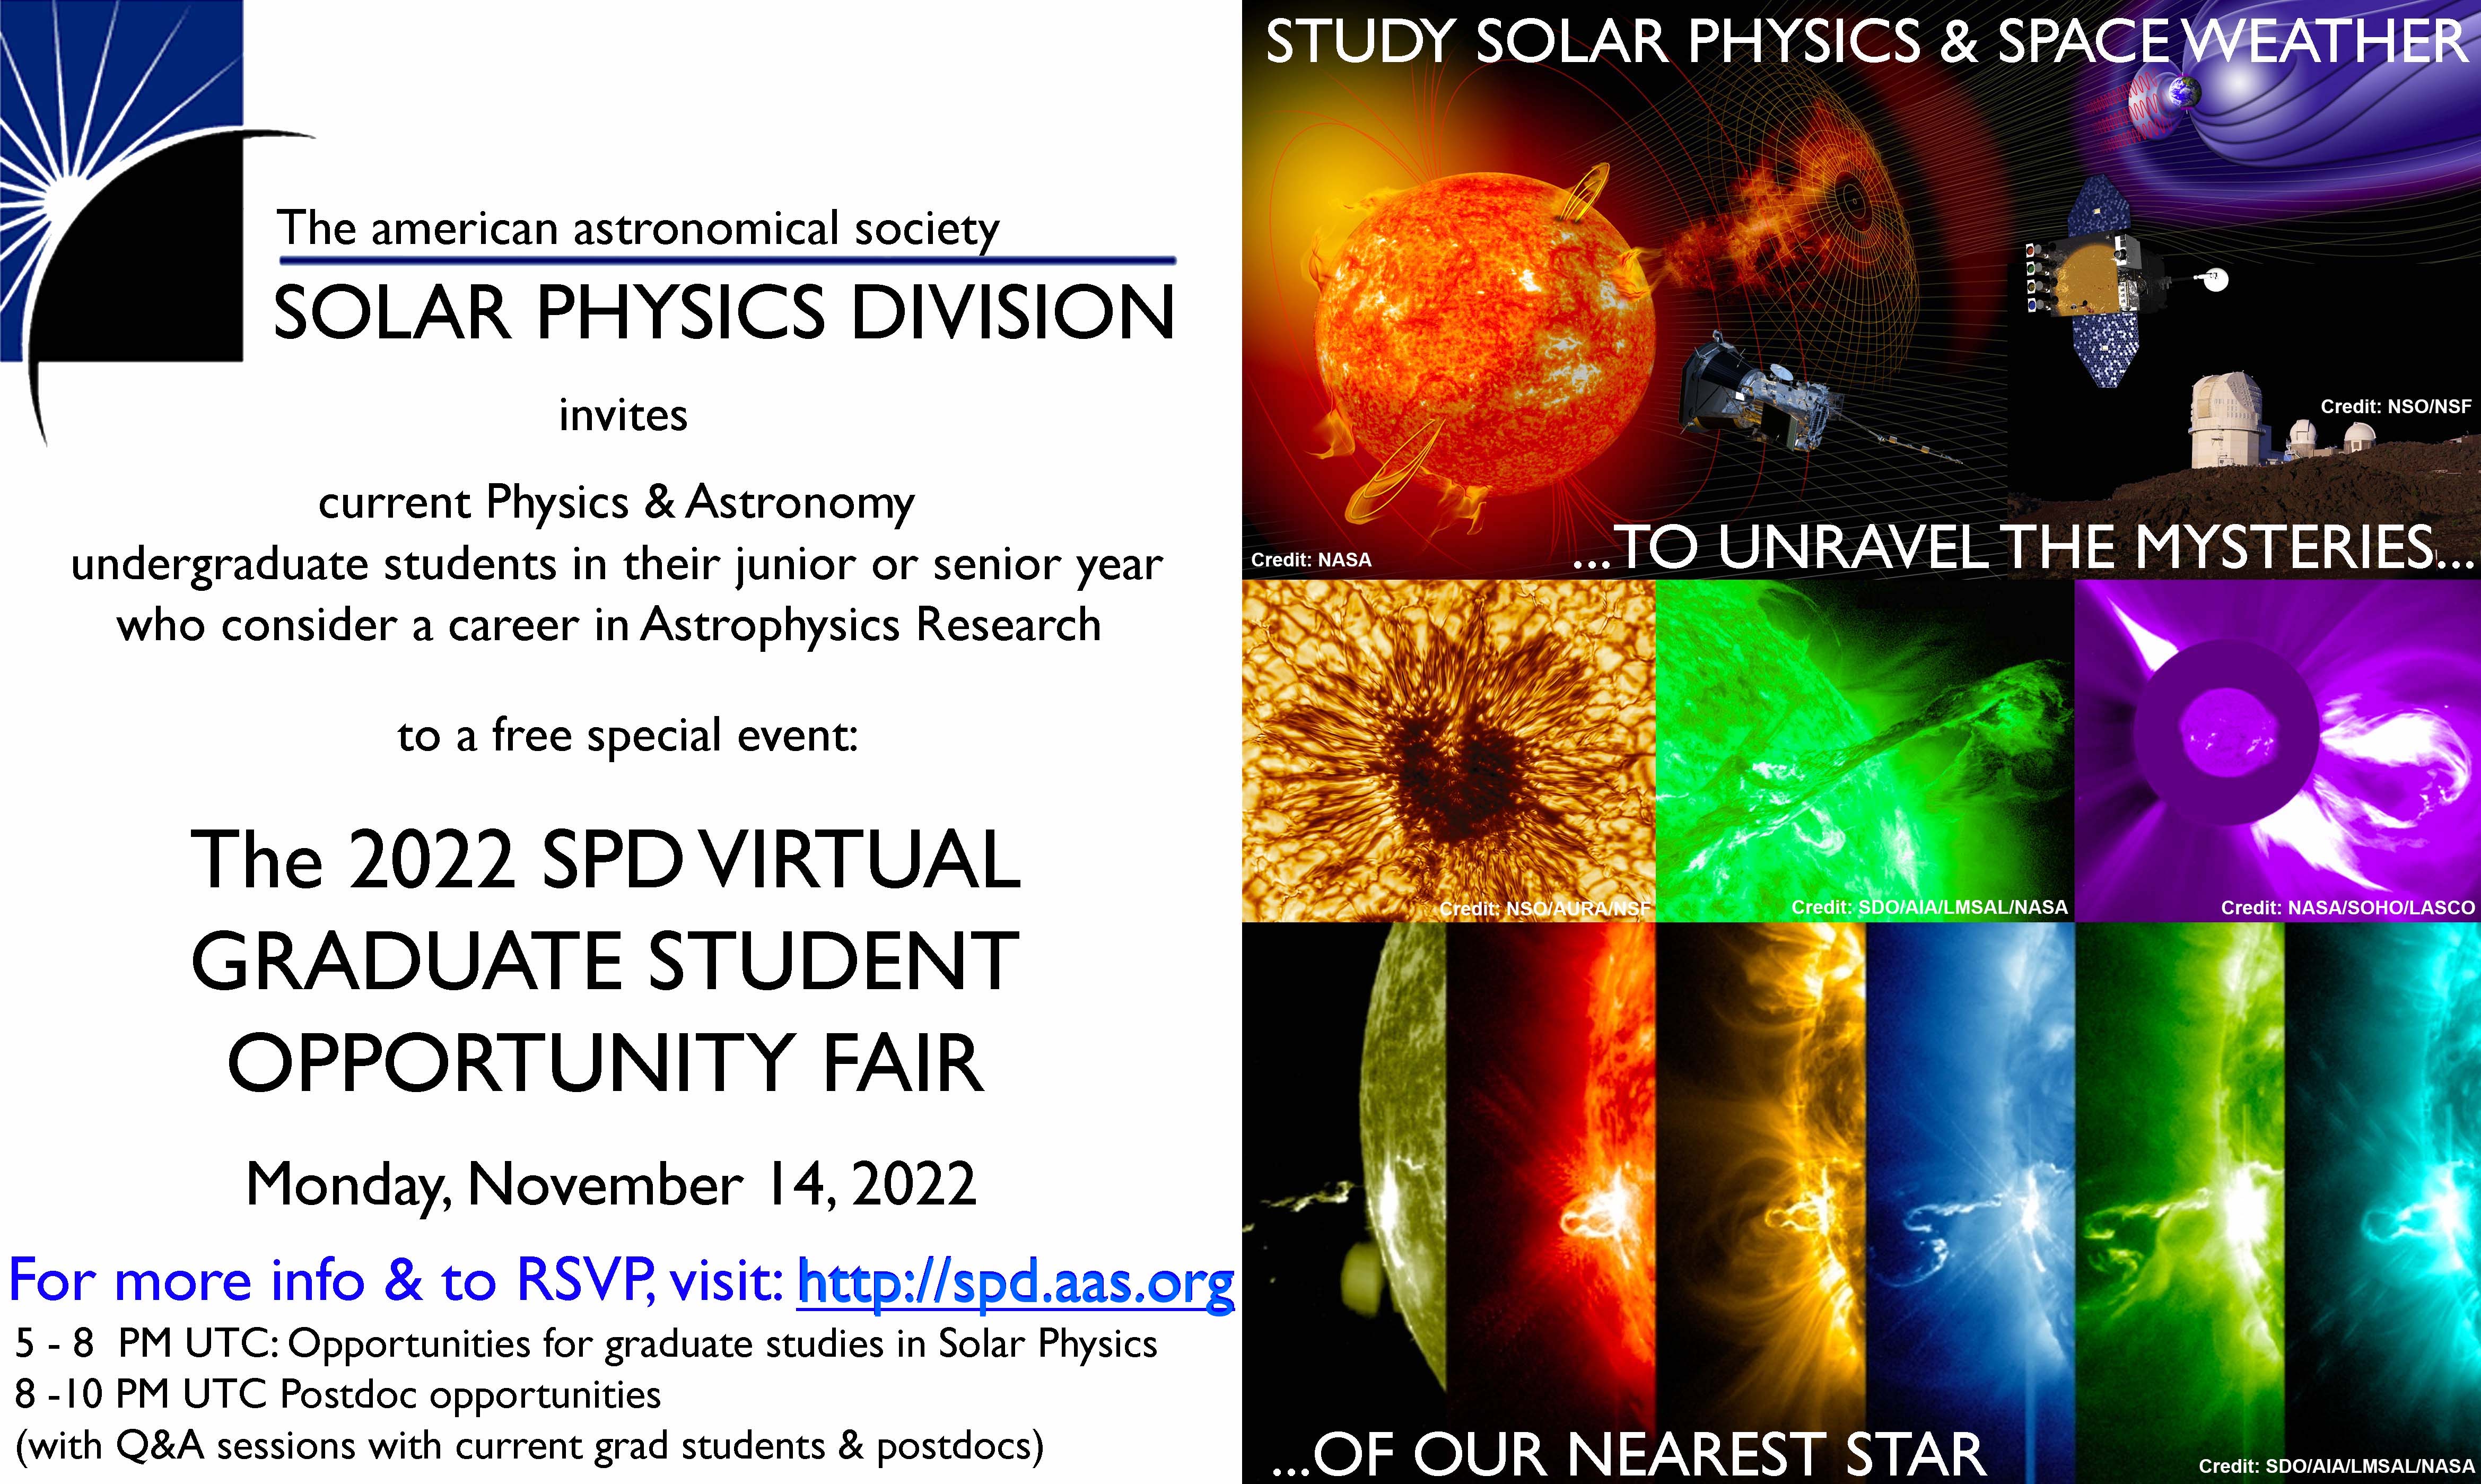 2022 SPD Grad & Postdoc Fair Flyer. "Study Solar Physics and Space Weather to Unravel the Mysteries of our Nearest Star!"